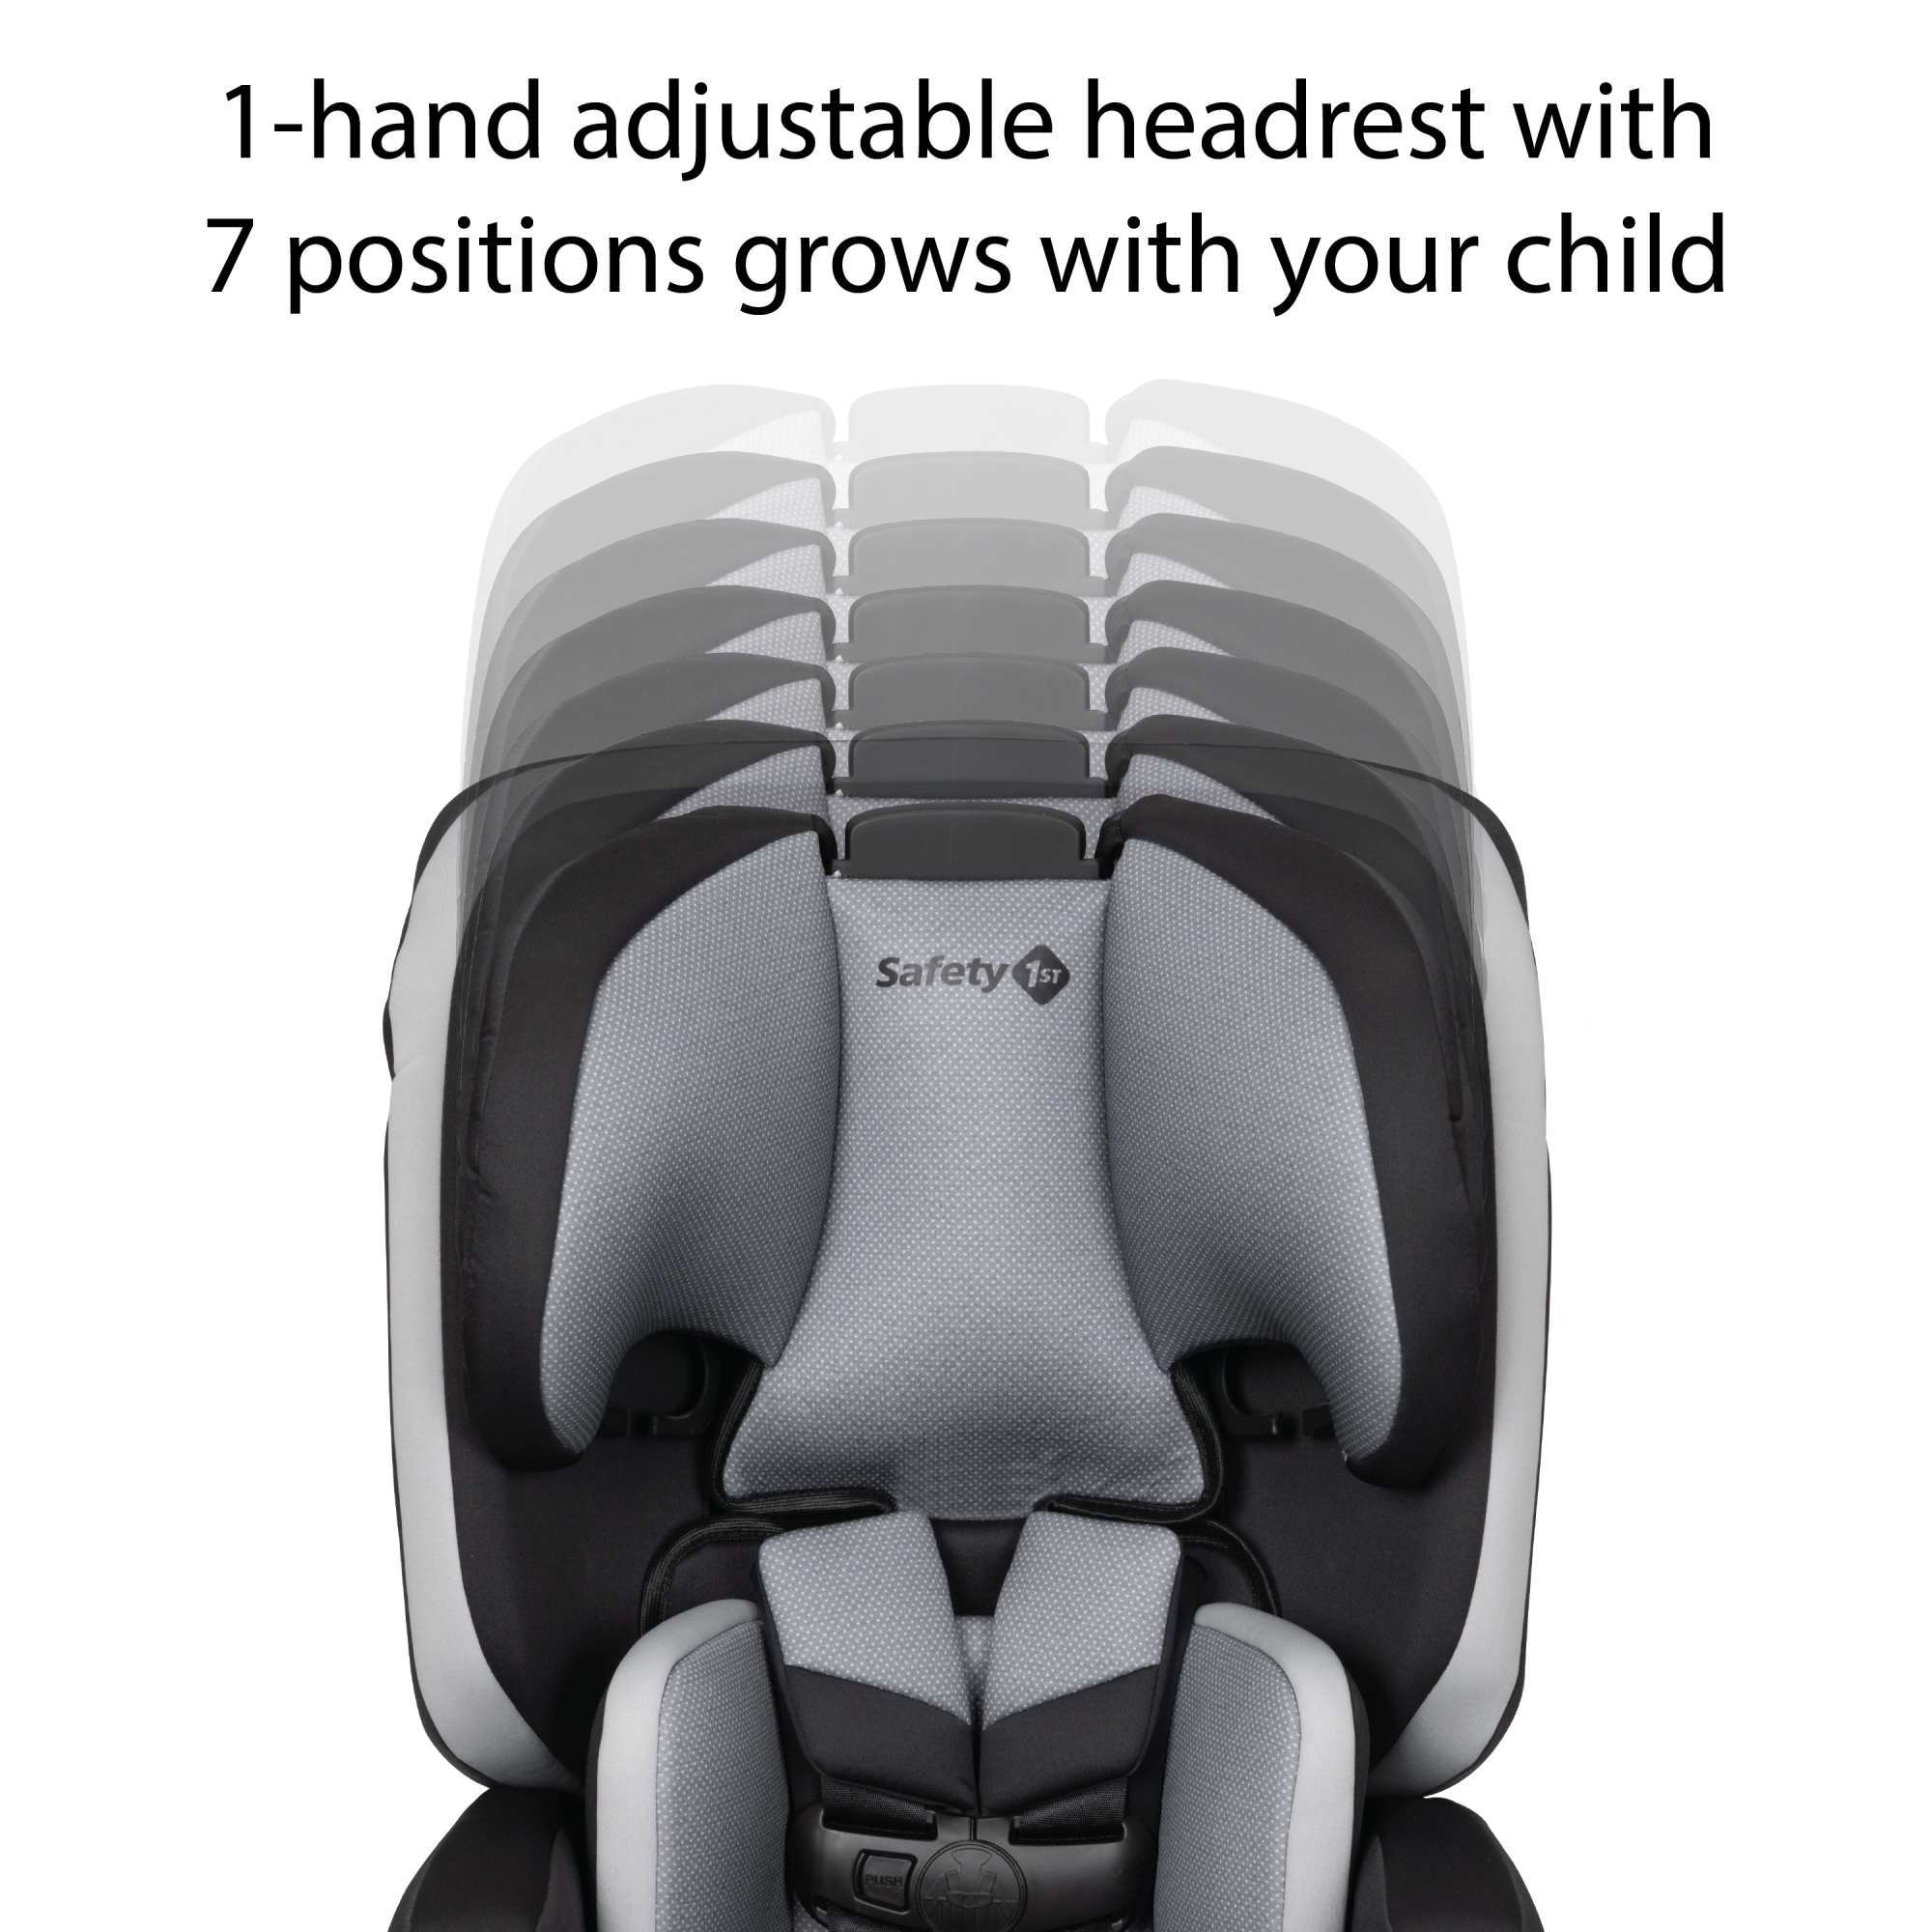 Boost-and-Go All-in-One Harness Booster Car Seat - 1-hand adjustable headrest with 7 positions grows with your child